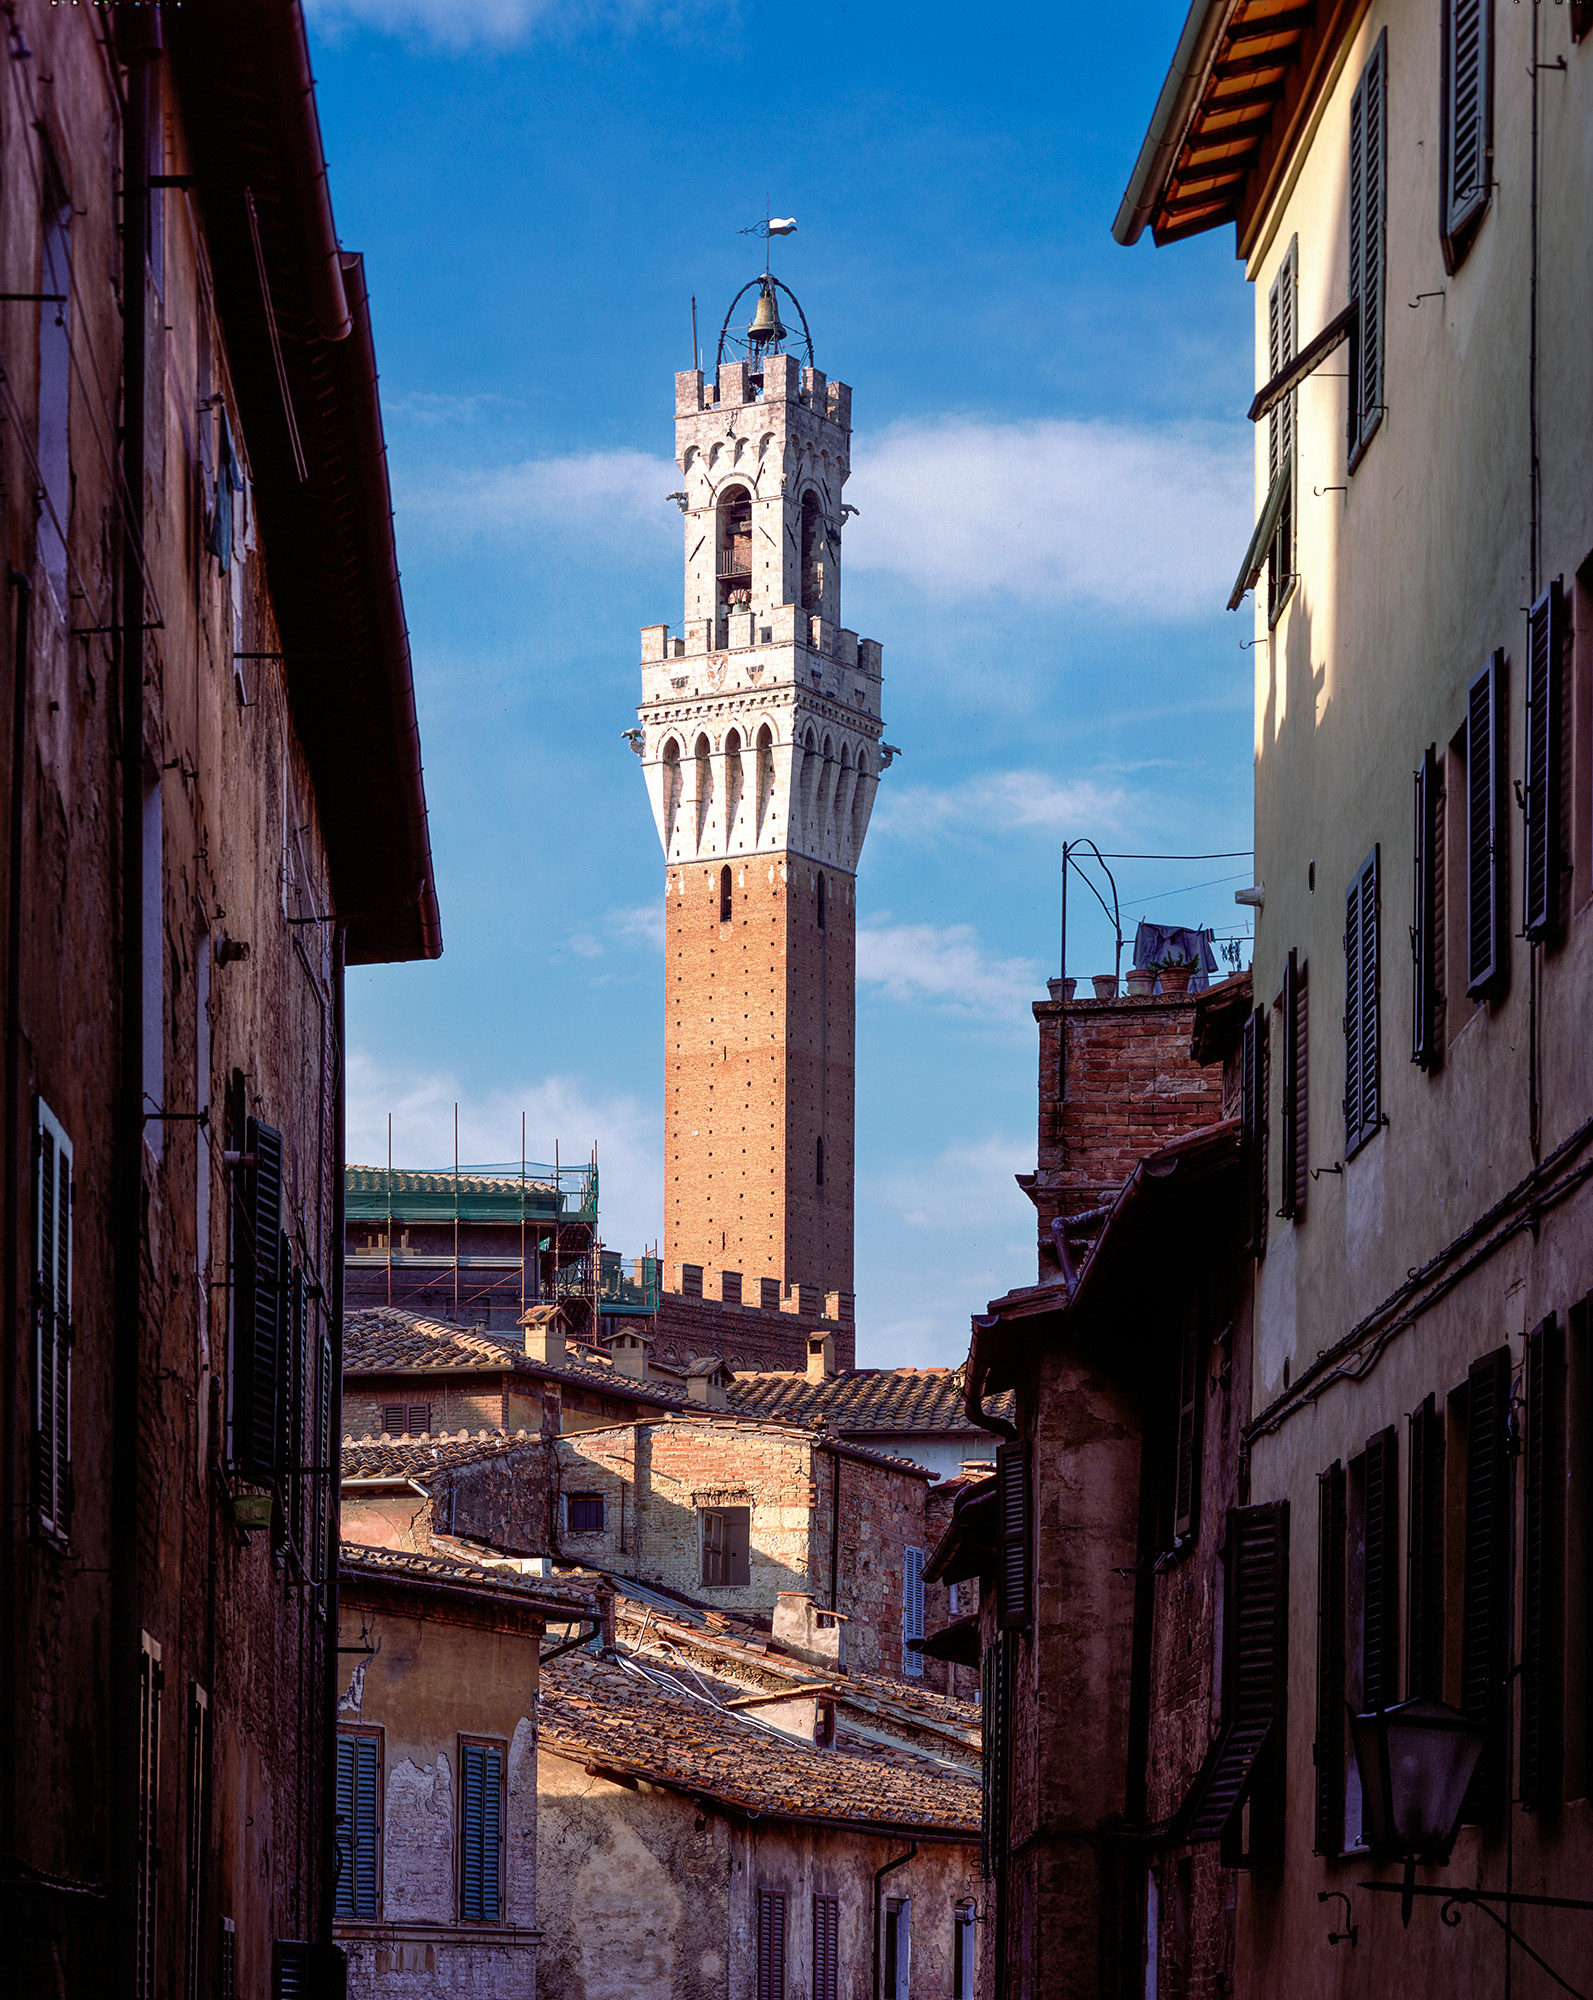 Captured with my Ebony SV45Te View Camera using Fuji Provia 100F film, this vertical image features the iconic Torre del Mangia...